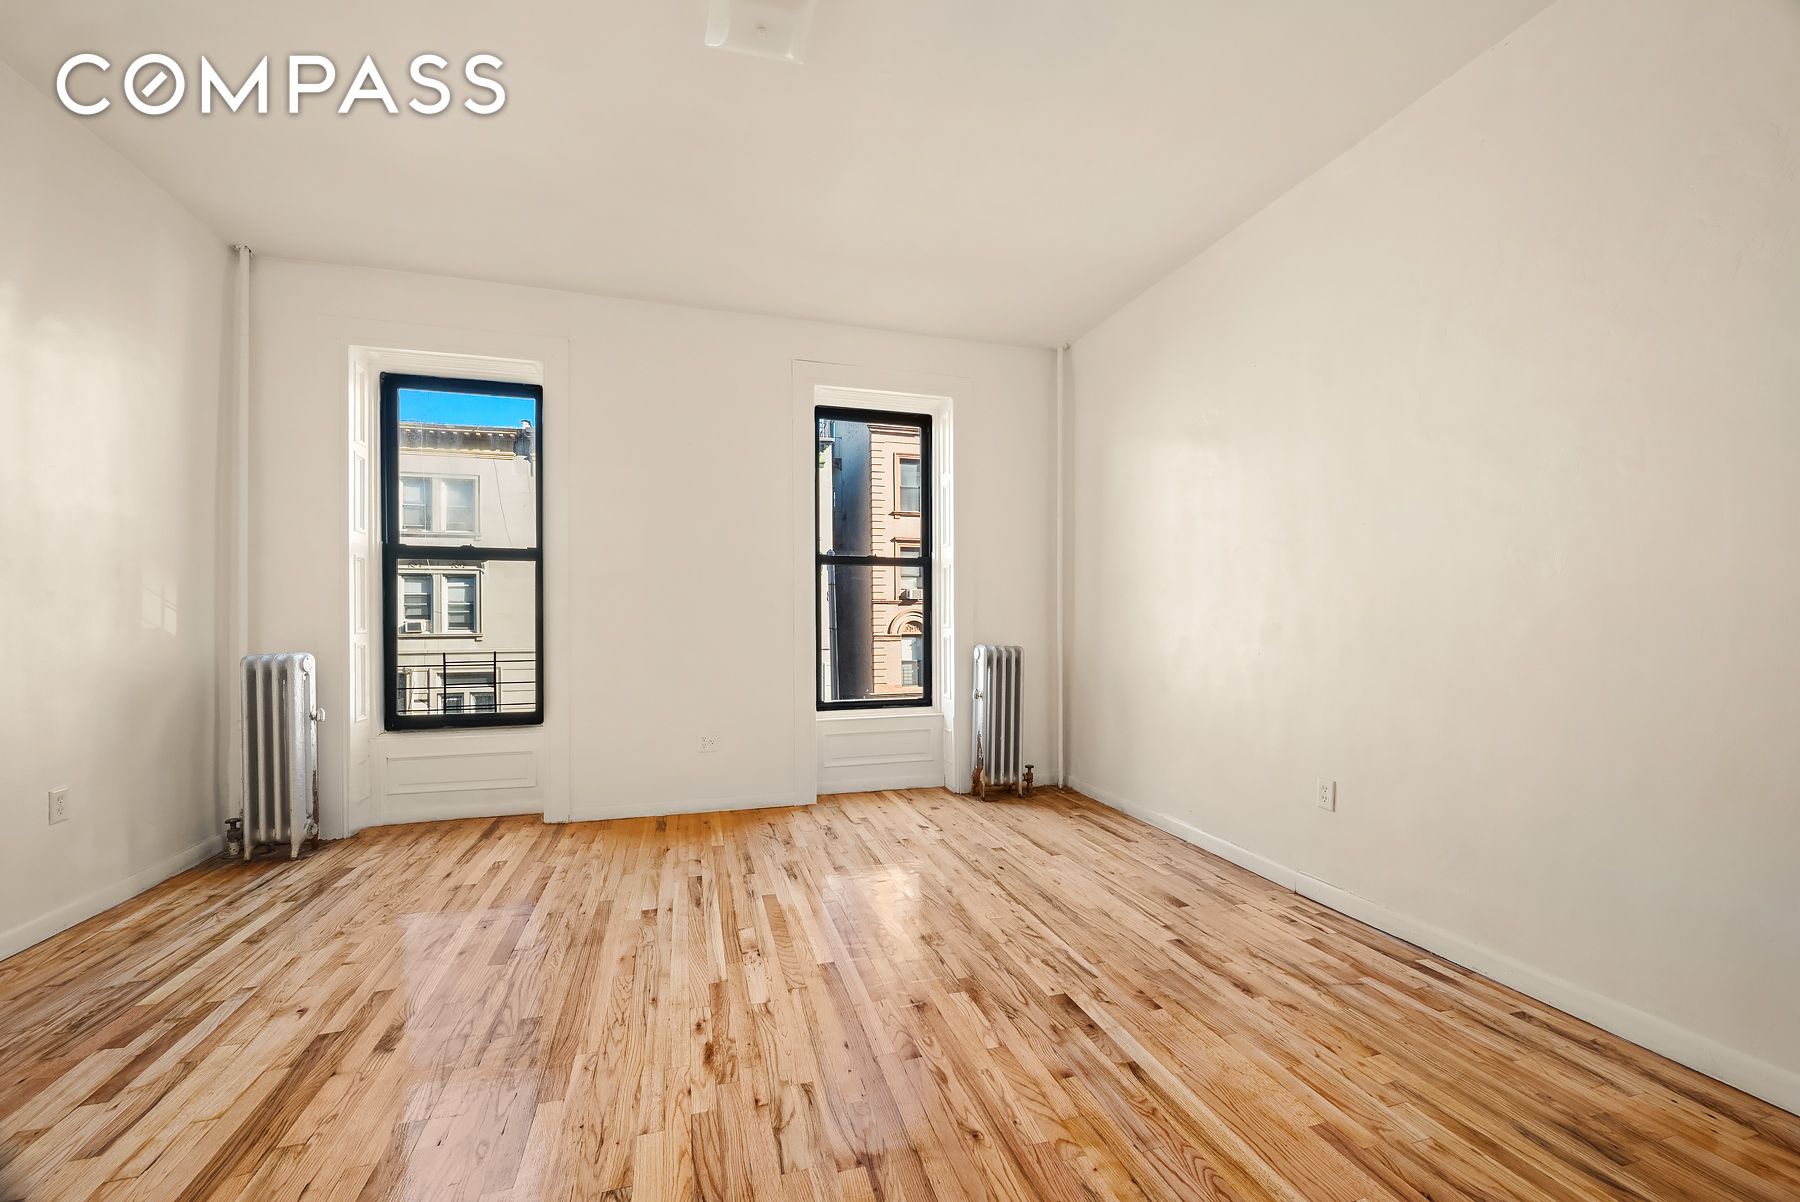 306 West 139th Street 3, Central Harlem, Upper Manhattan, NYC - 1 Bedrooms  
1 Bathrooms  
3 Rooms - 